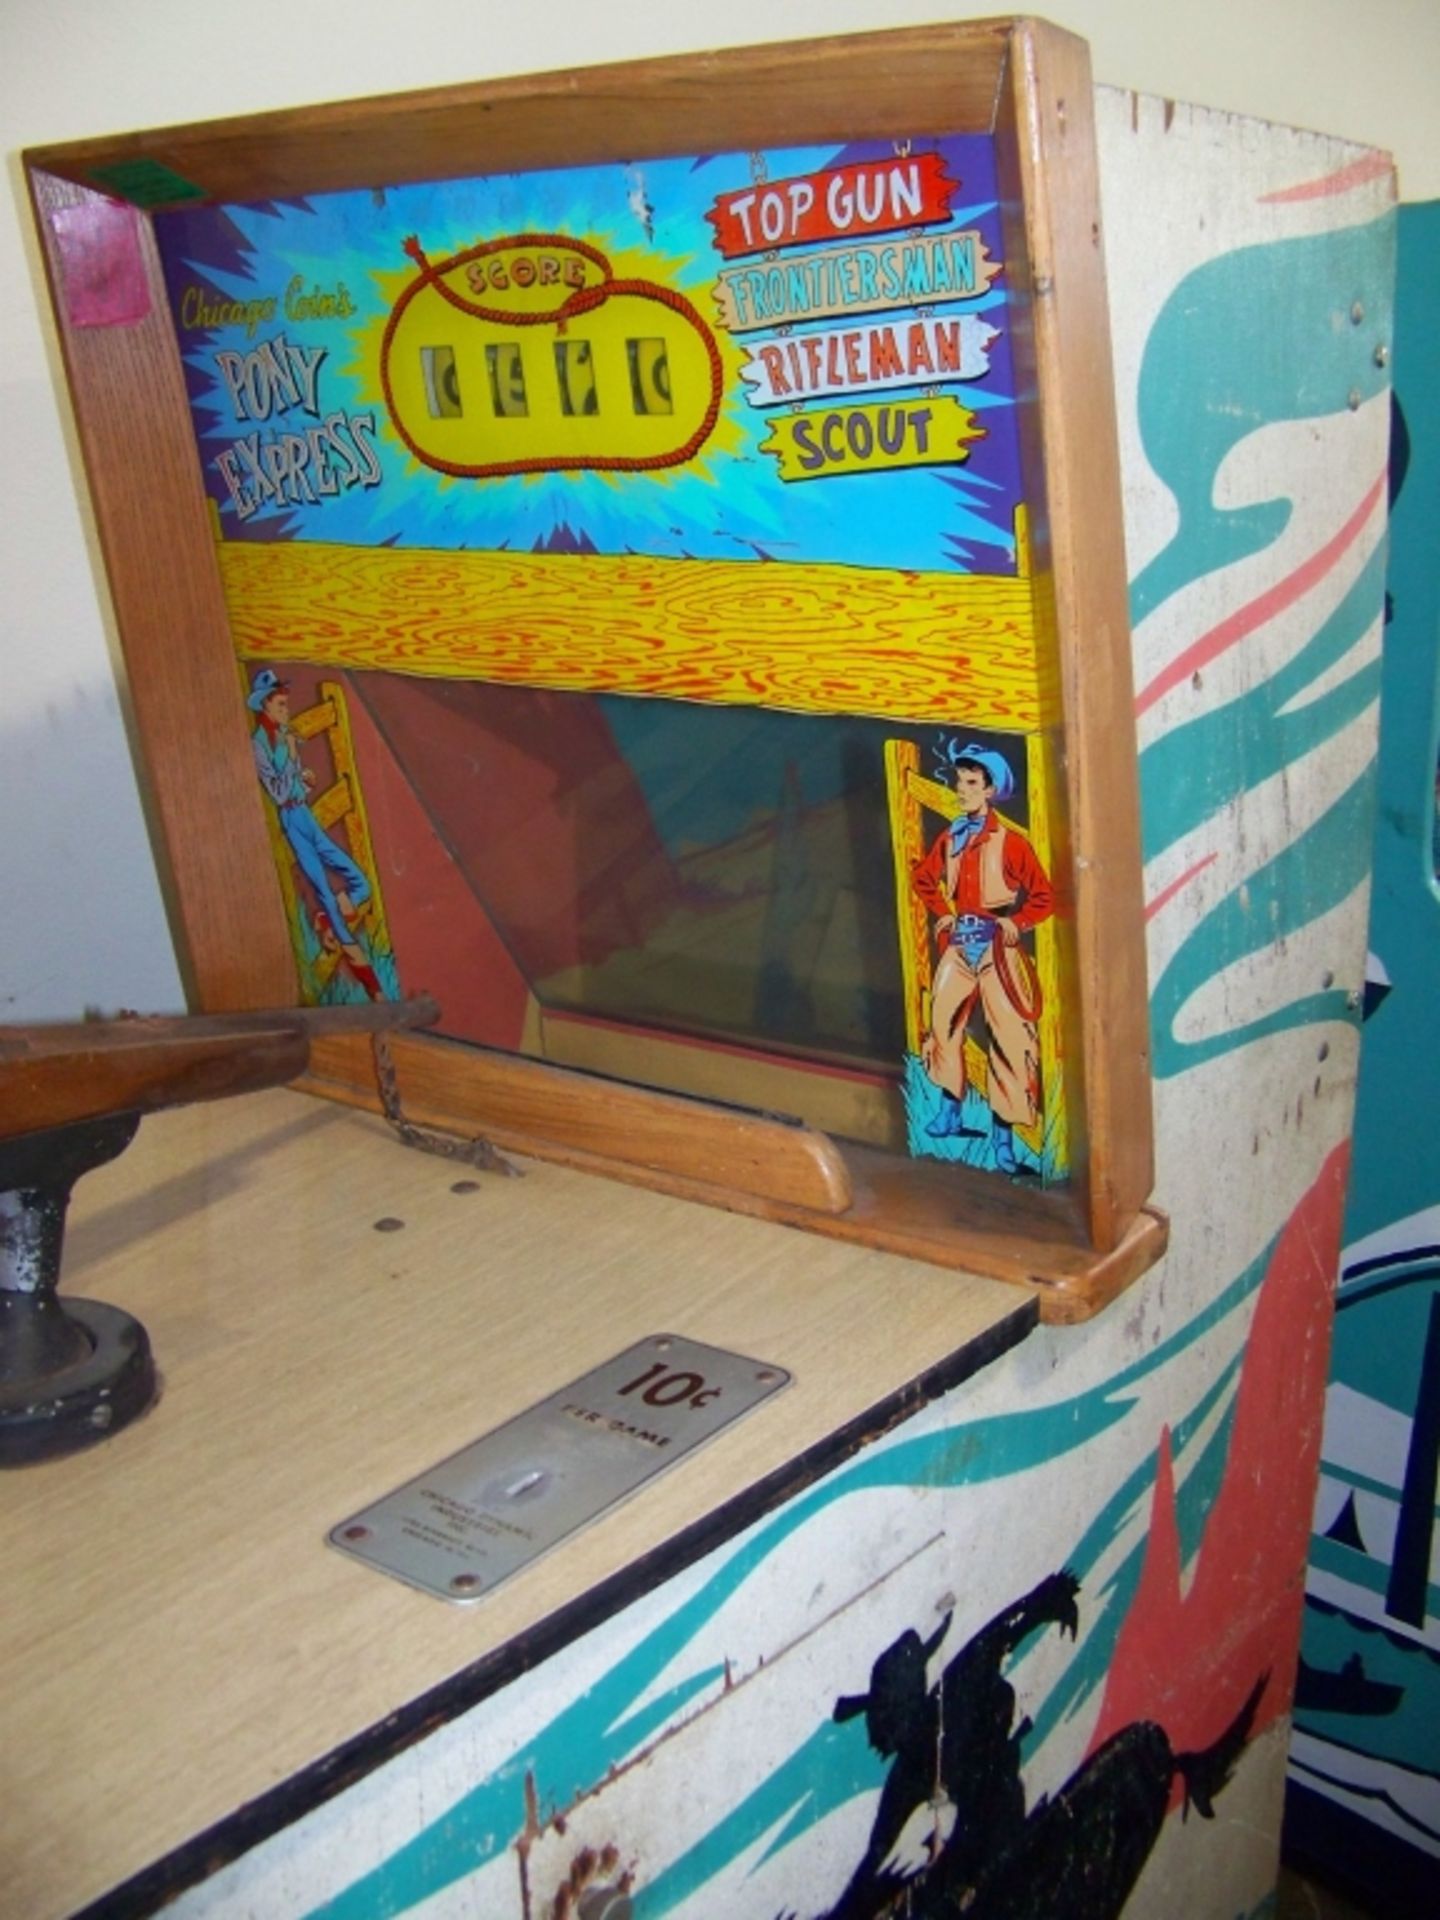 1960 CHICAGO COIN'S PONY EXPRESS RIFLE ARCADE GAME - Image 4 of 6